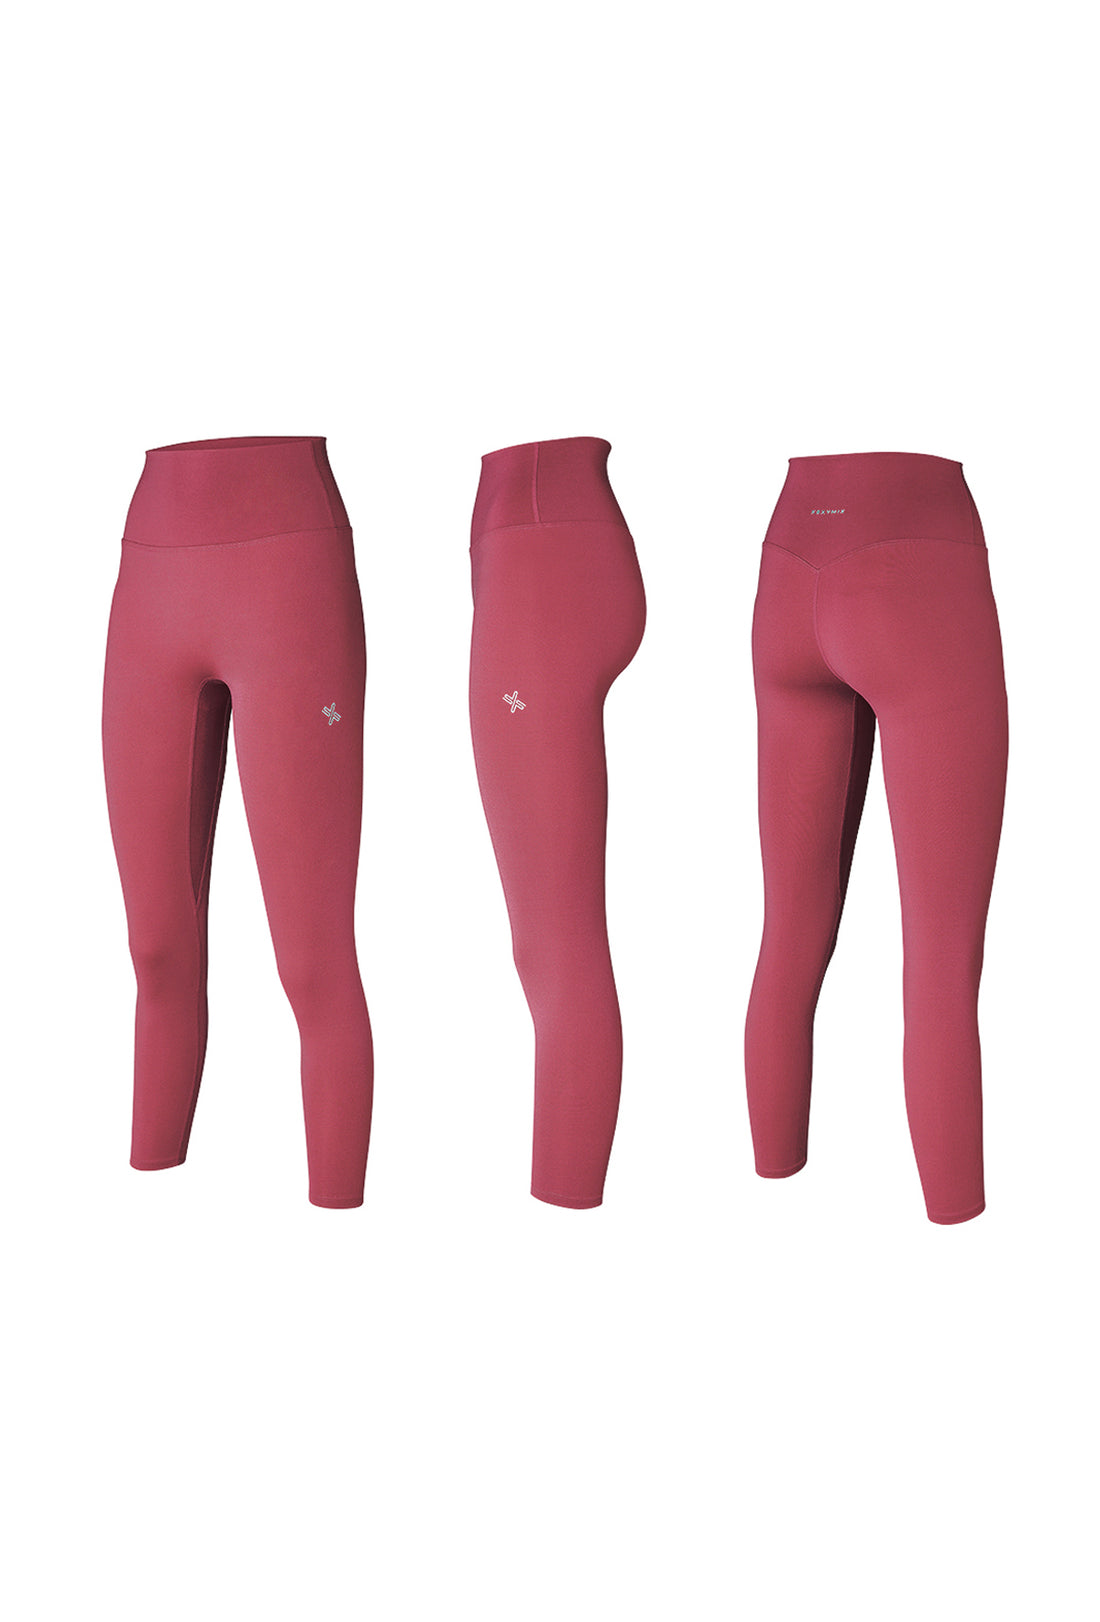 XEXYMIX V-Up 3D Plus Leggings - Mineral pink